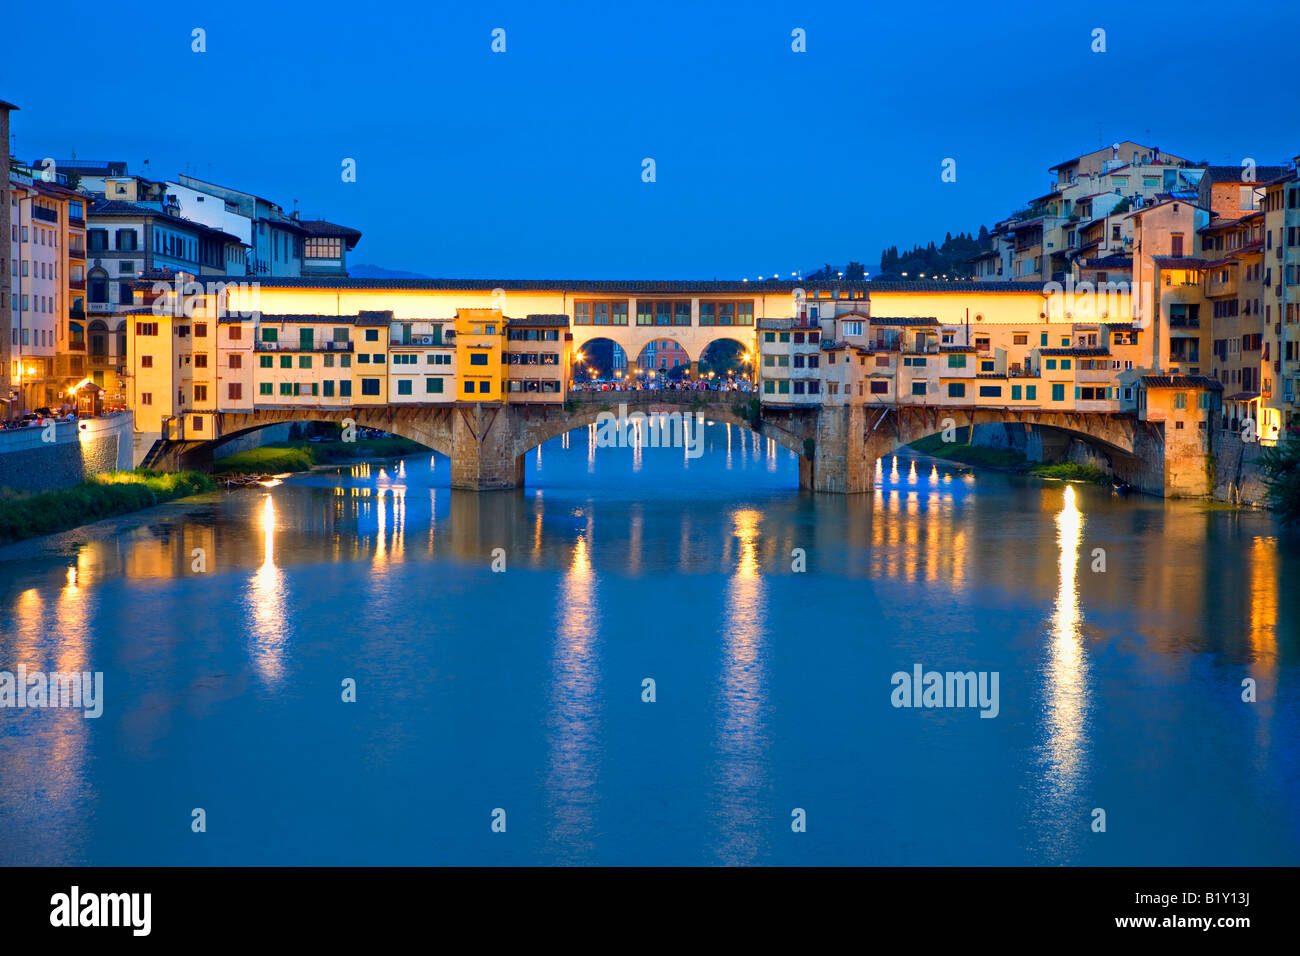 Ponte vecchio at night in Florence Stock Photo